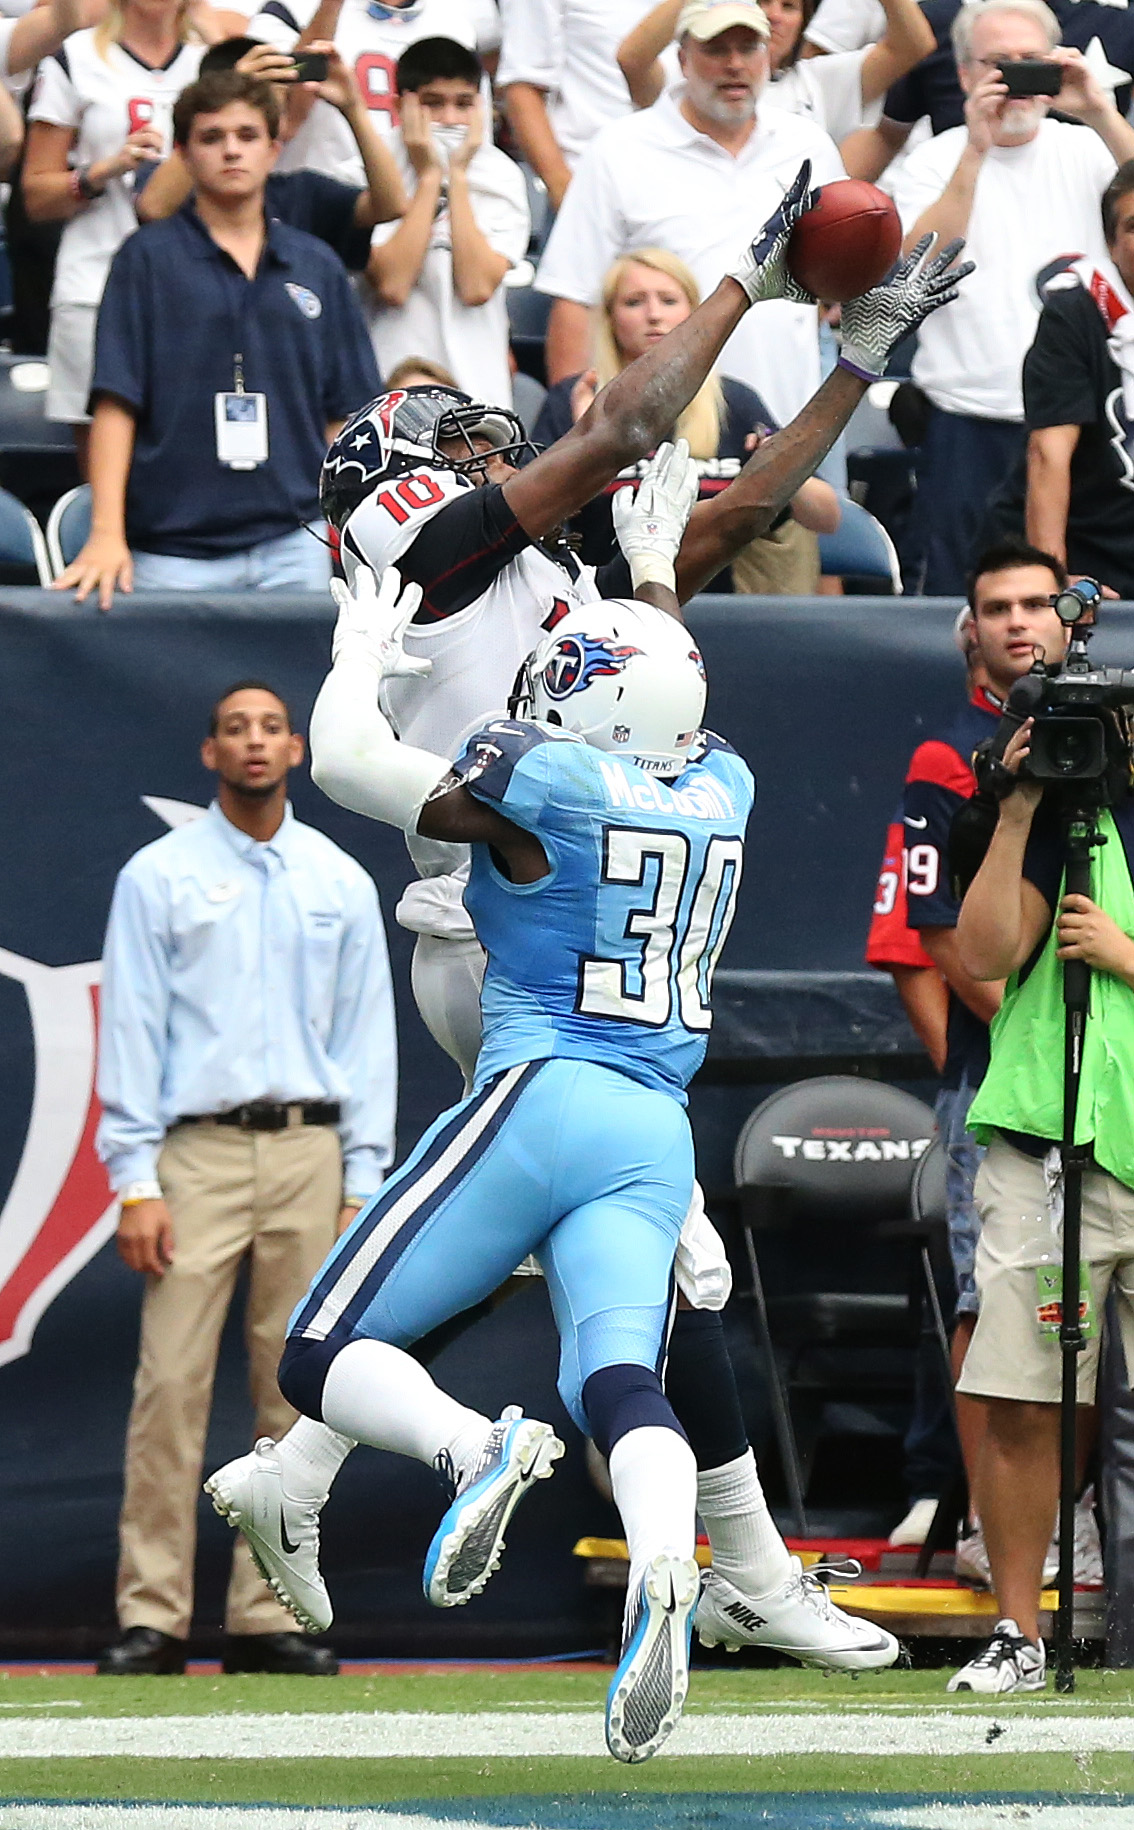 Sep 15, 2013; Houston, TX, USA; Houston Texans receiver DeAndre Hopkins (10) catches a touchdown pass in overtime against Tennessee Titans cornerback Jason McCourty (30) at Reliant Stadium. The Houston Texans beat the Tennessee Titans 30-24 in overtime.